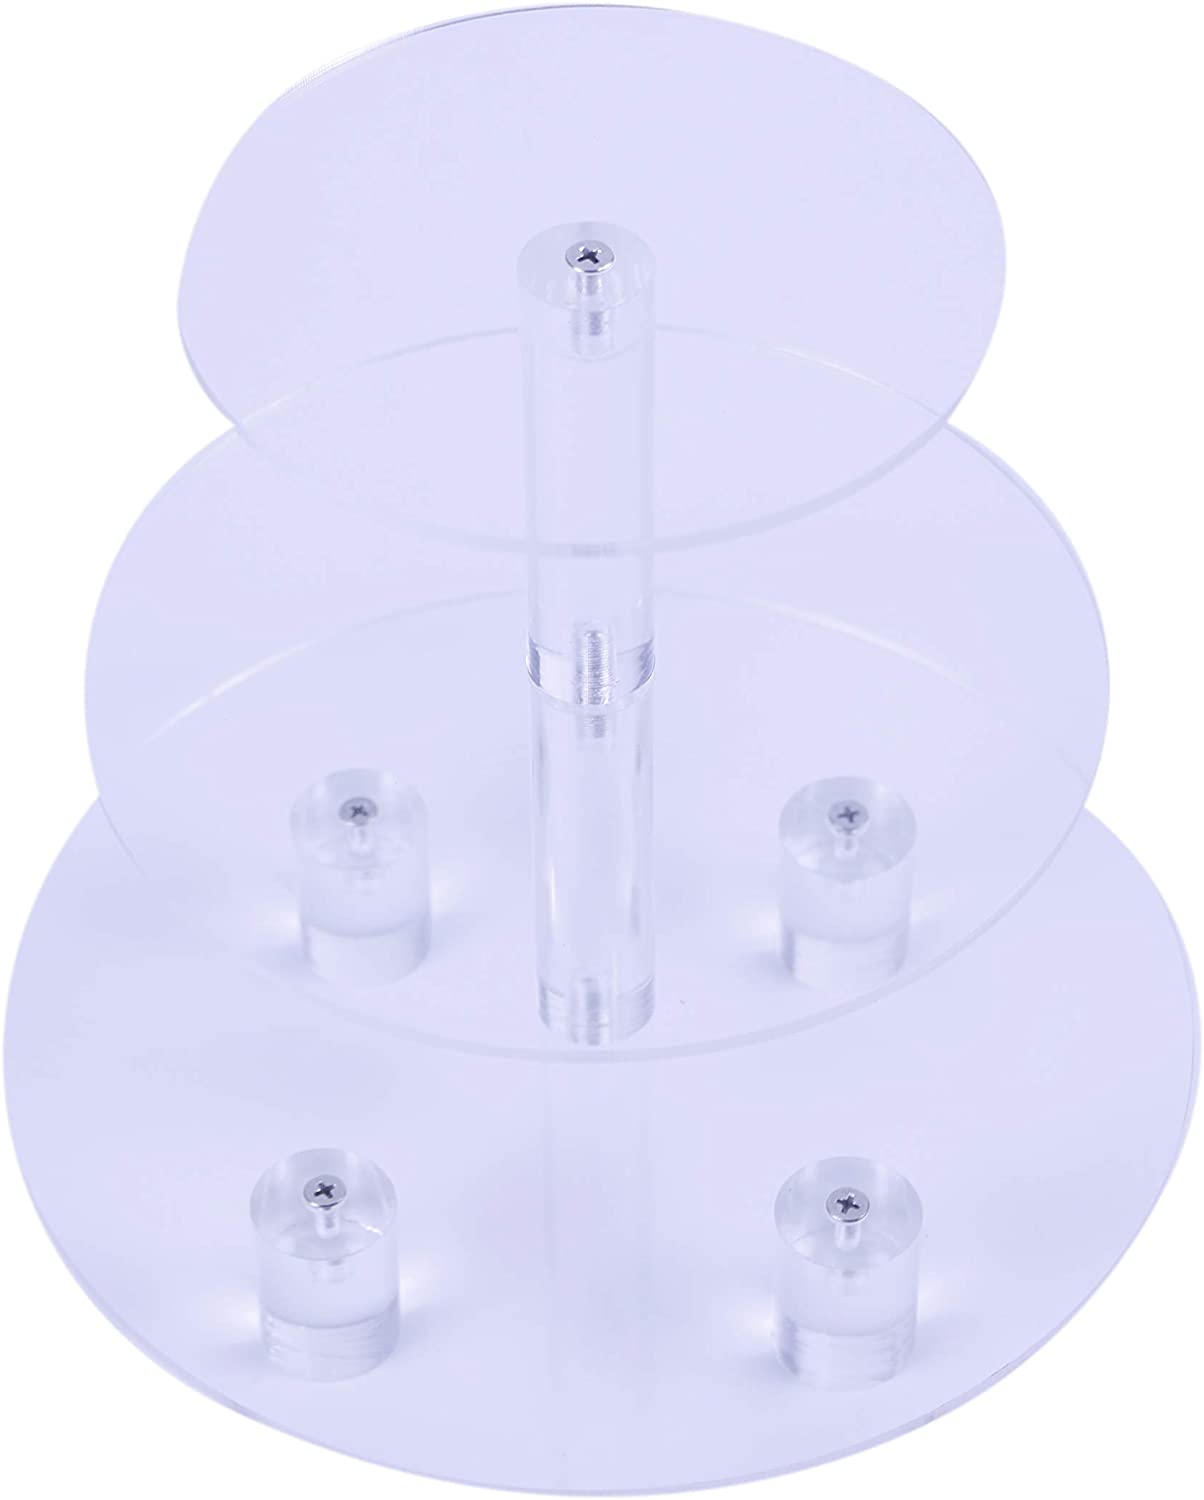 HMROVOOM Acrylic Cupcake Stand 3 Tier Round with base